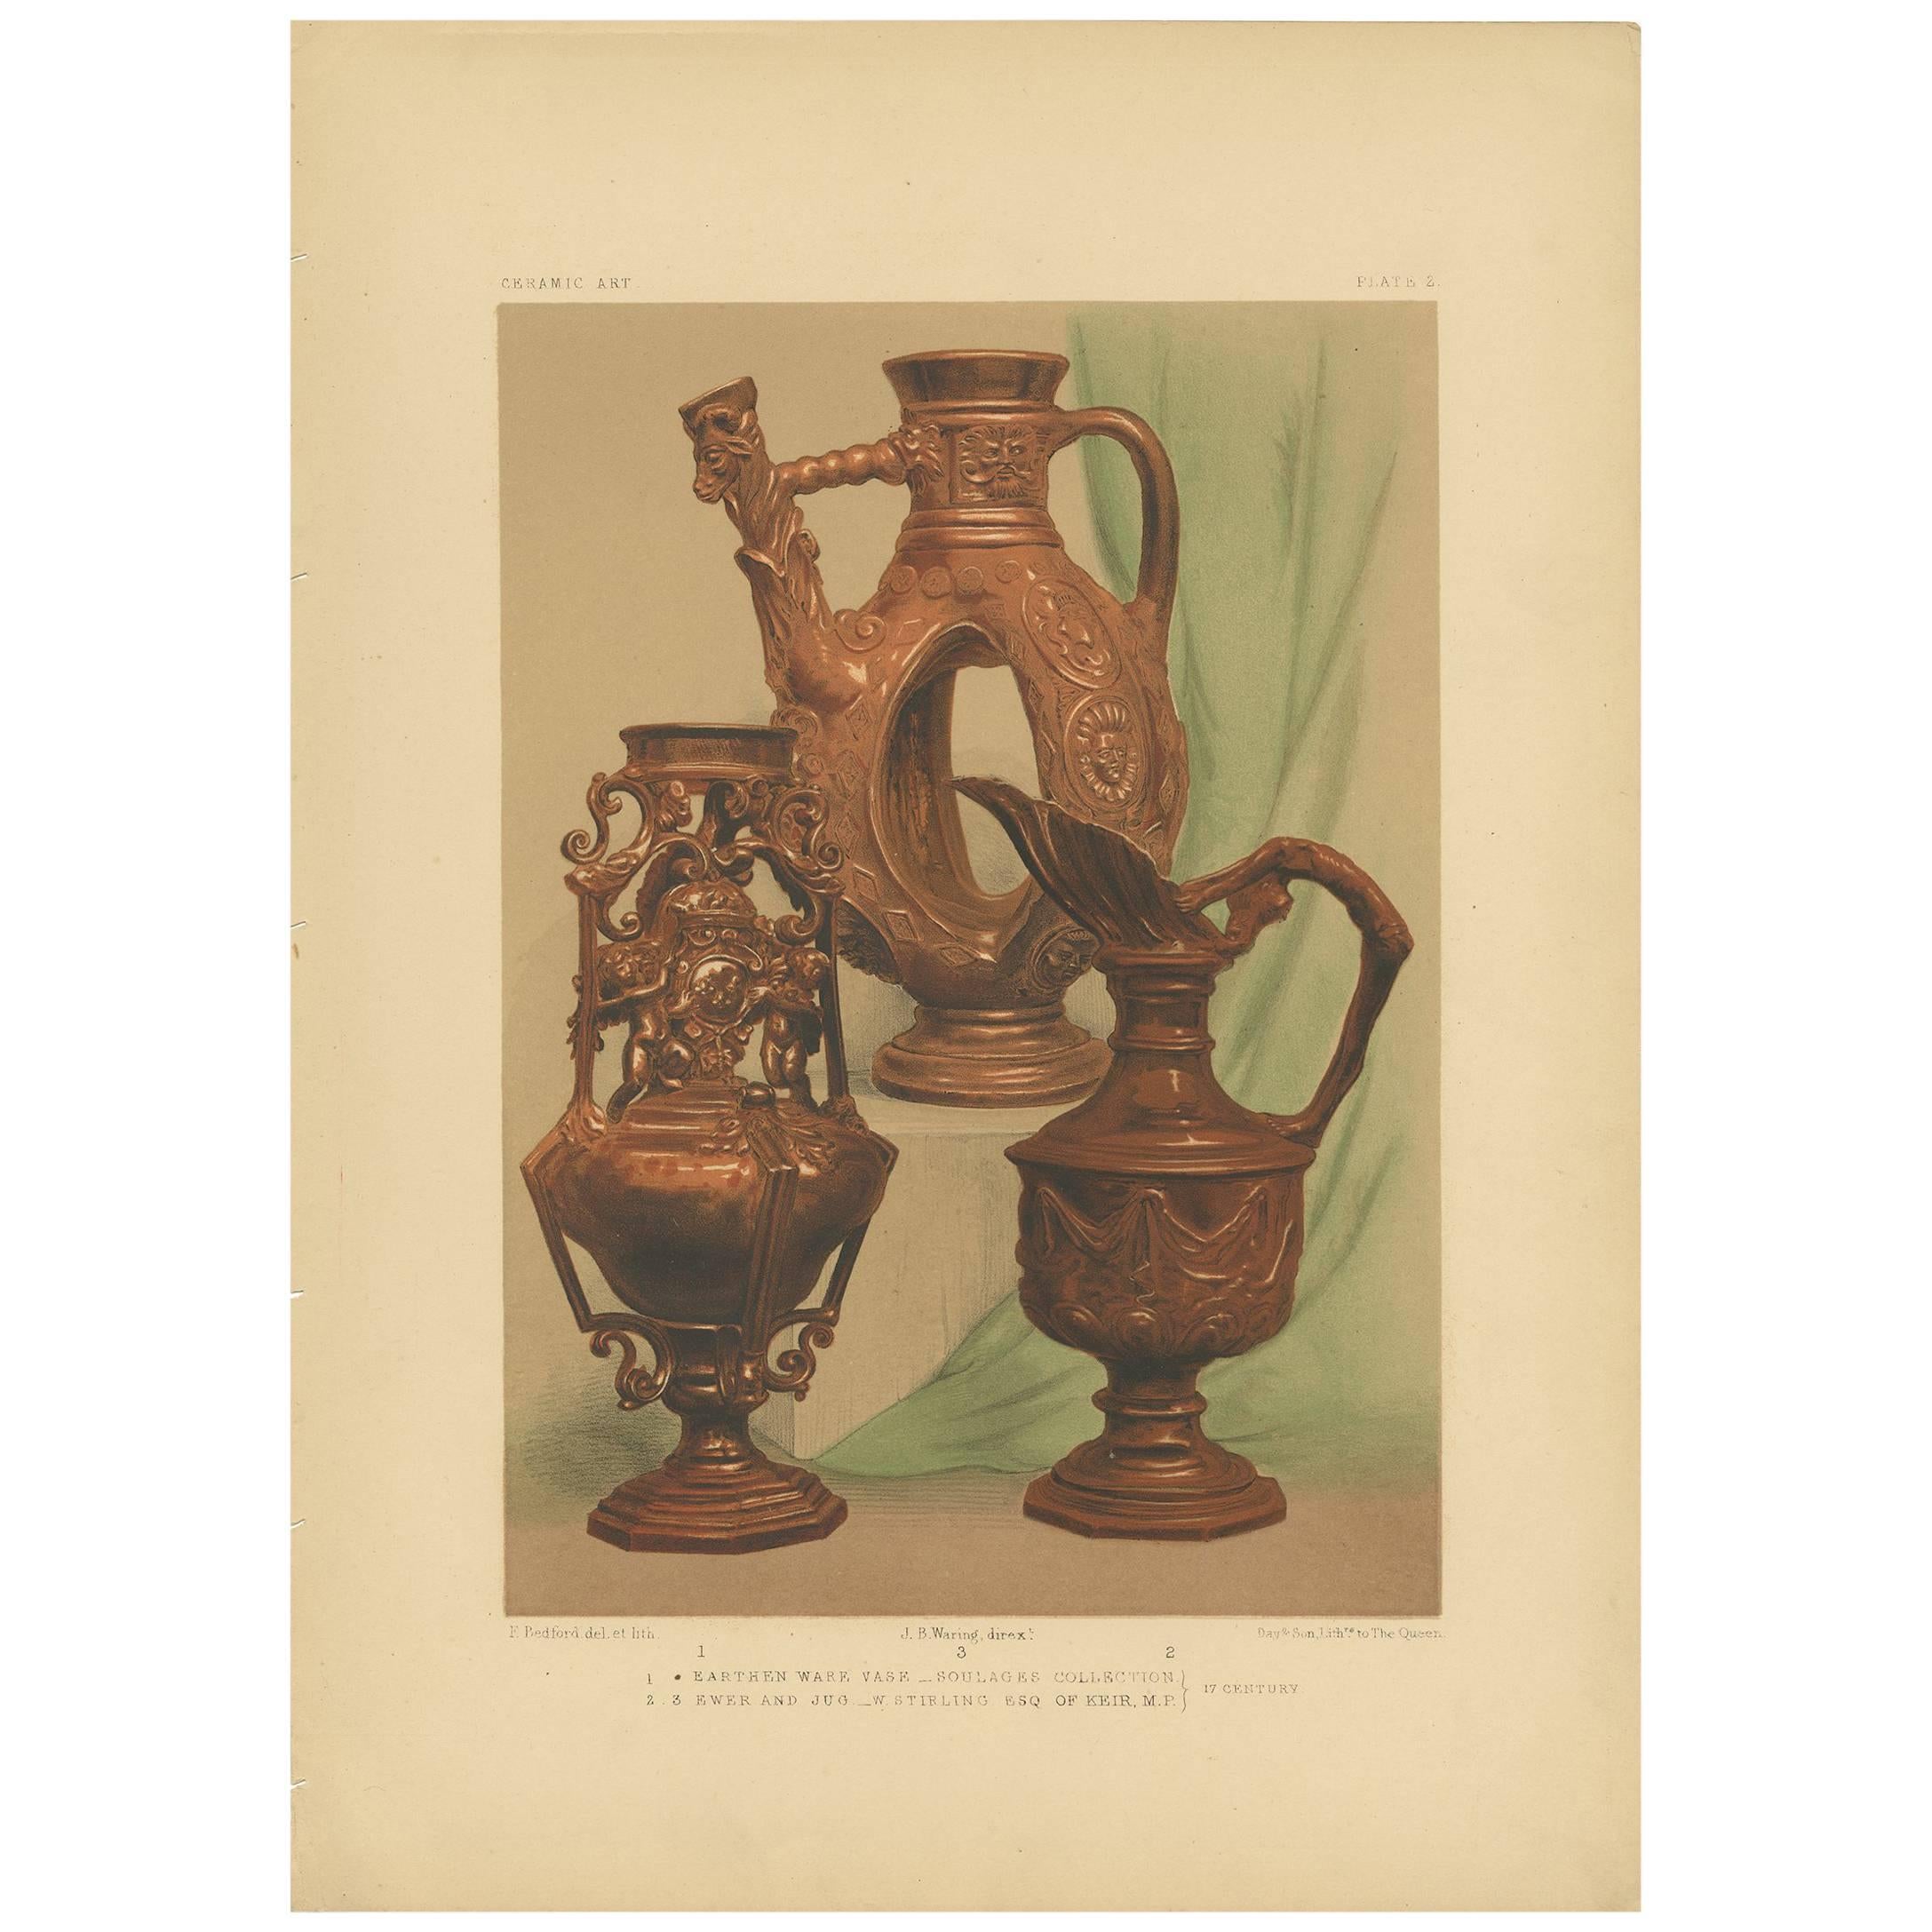 Pl. 2 Antique Print of an Earthenware Vase by Bedford, circa 1857